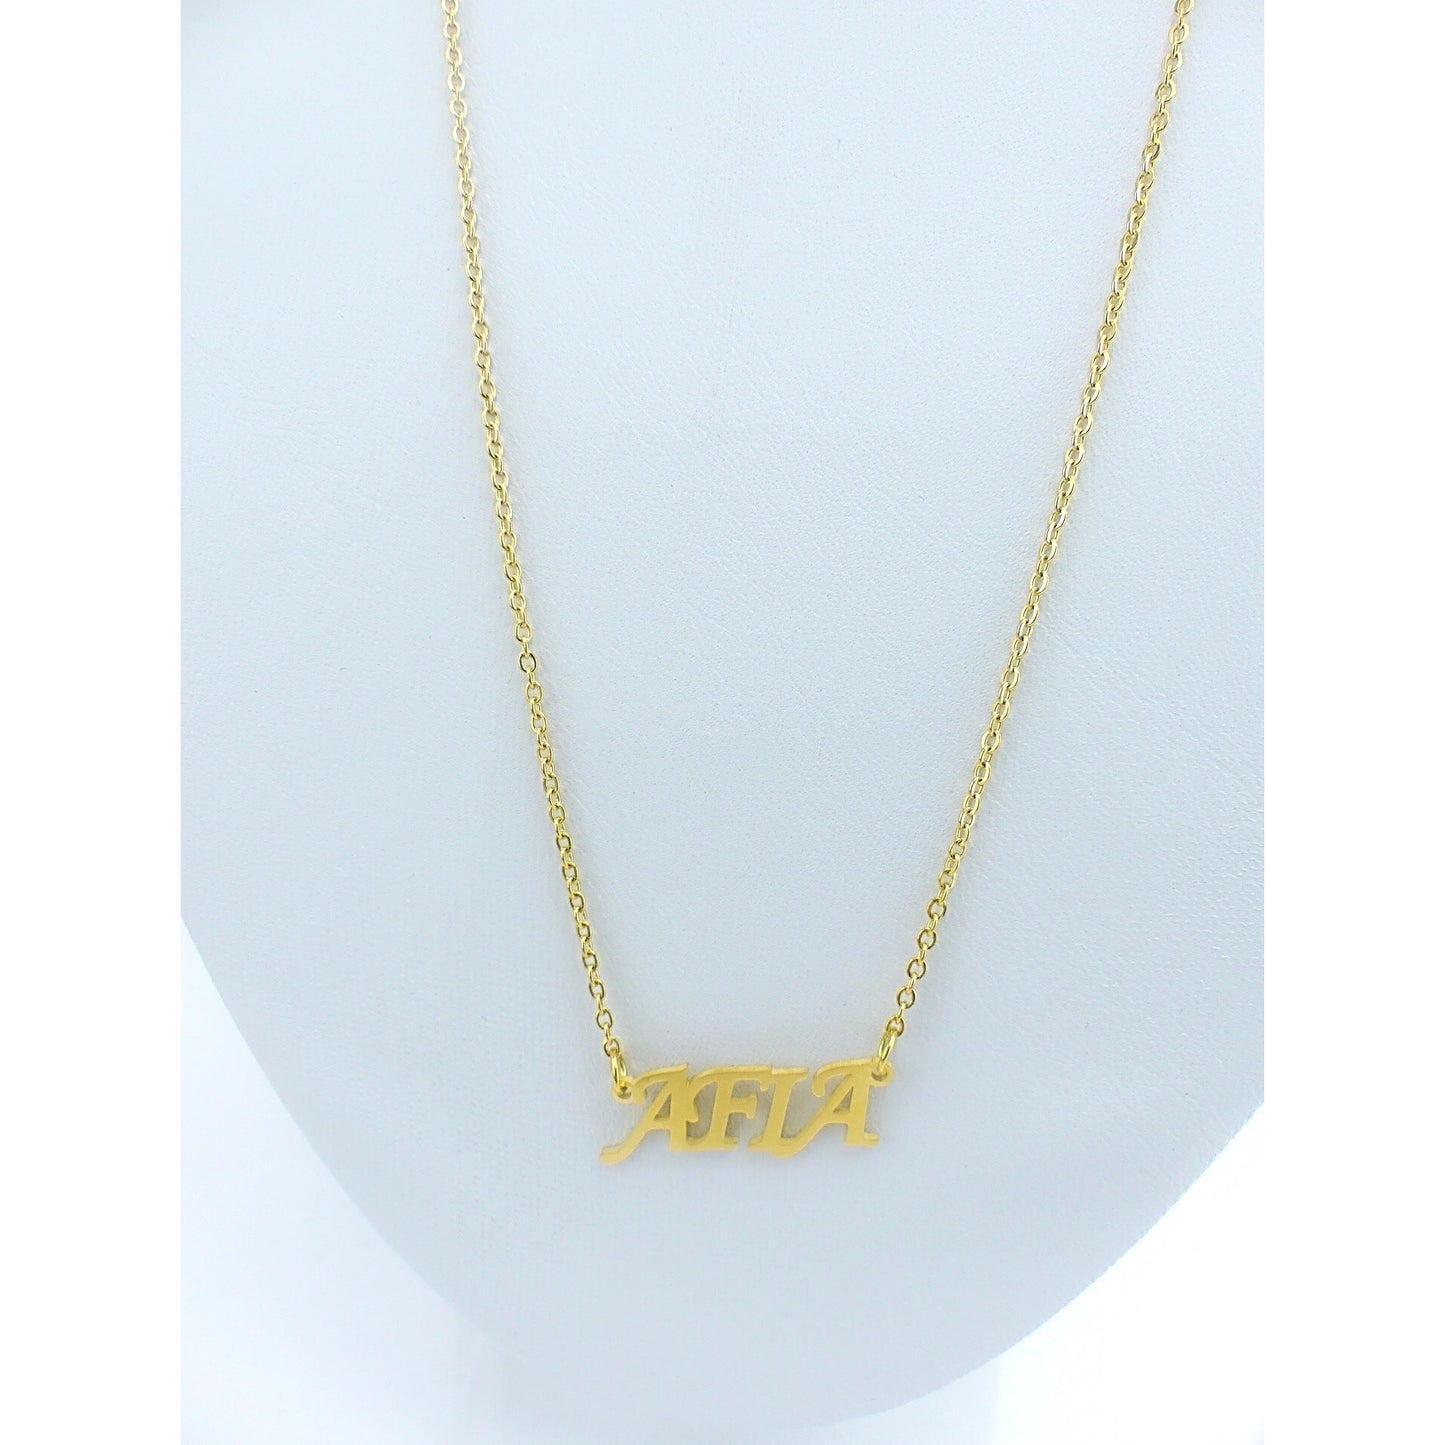 Day Name Necklace